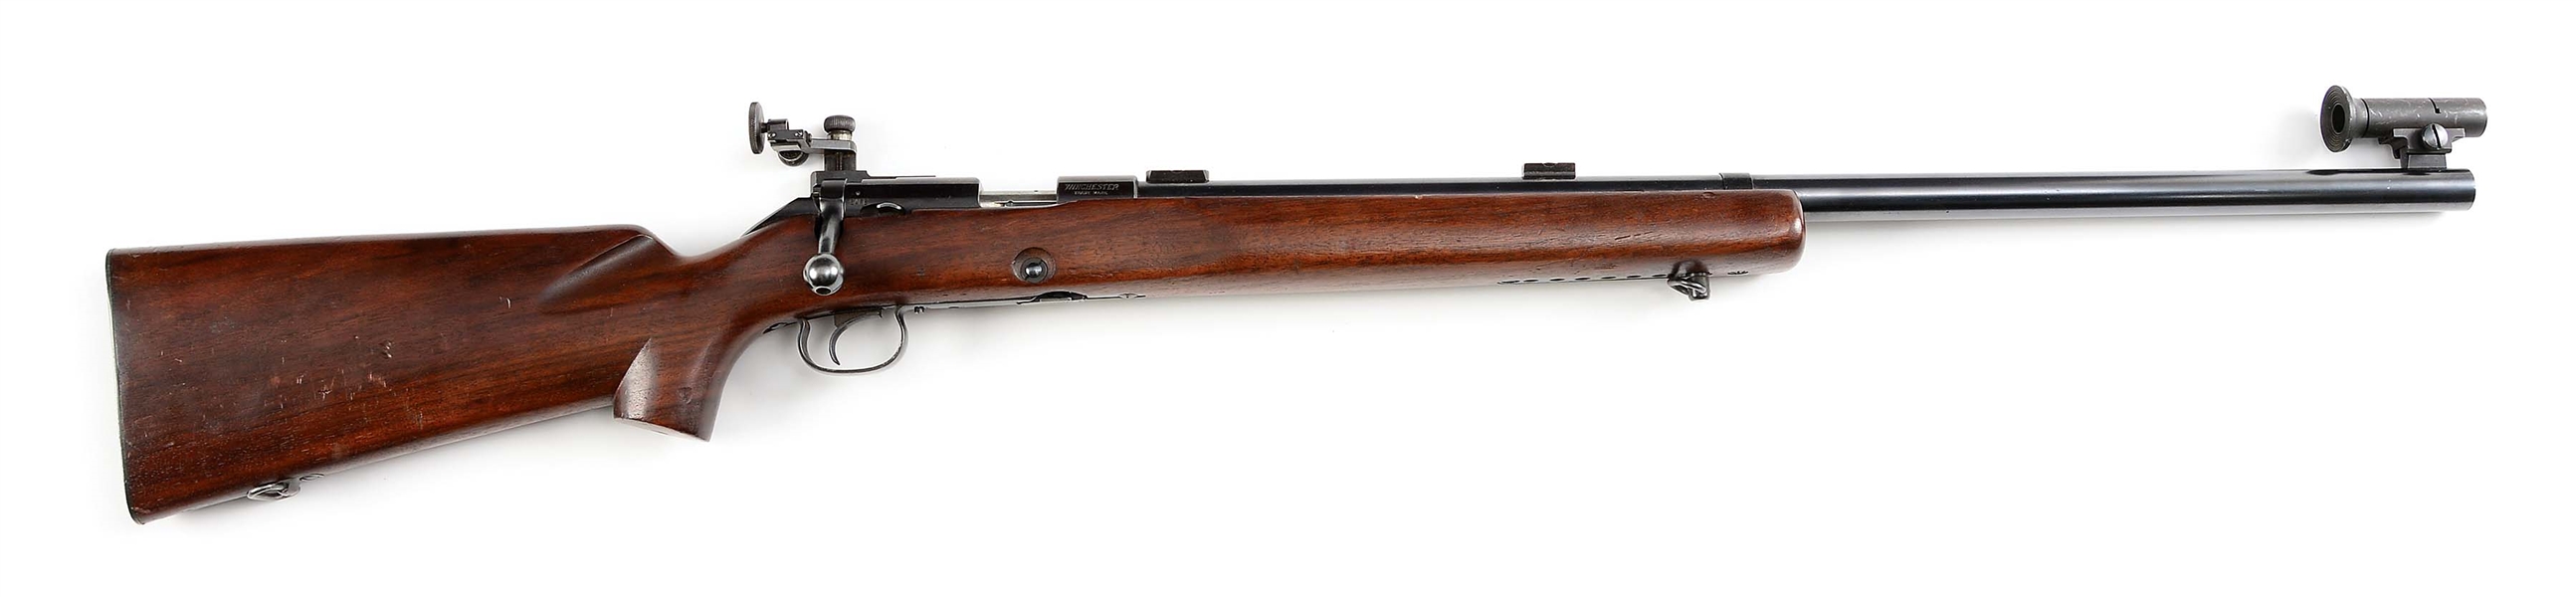 (C) U.S. PROPERTY MARKED WINCHESTER MODEL 52C BOLT ACTION .22 TARGET RIFLE WITH SIGHTS.